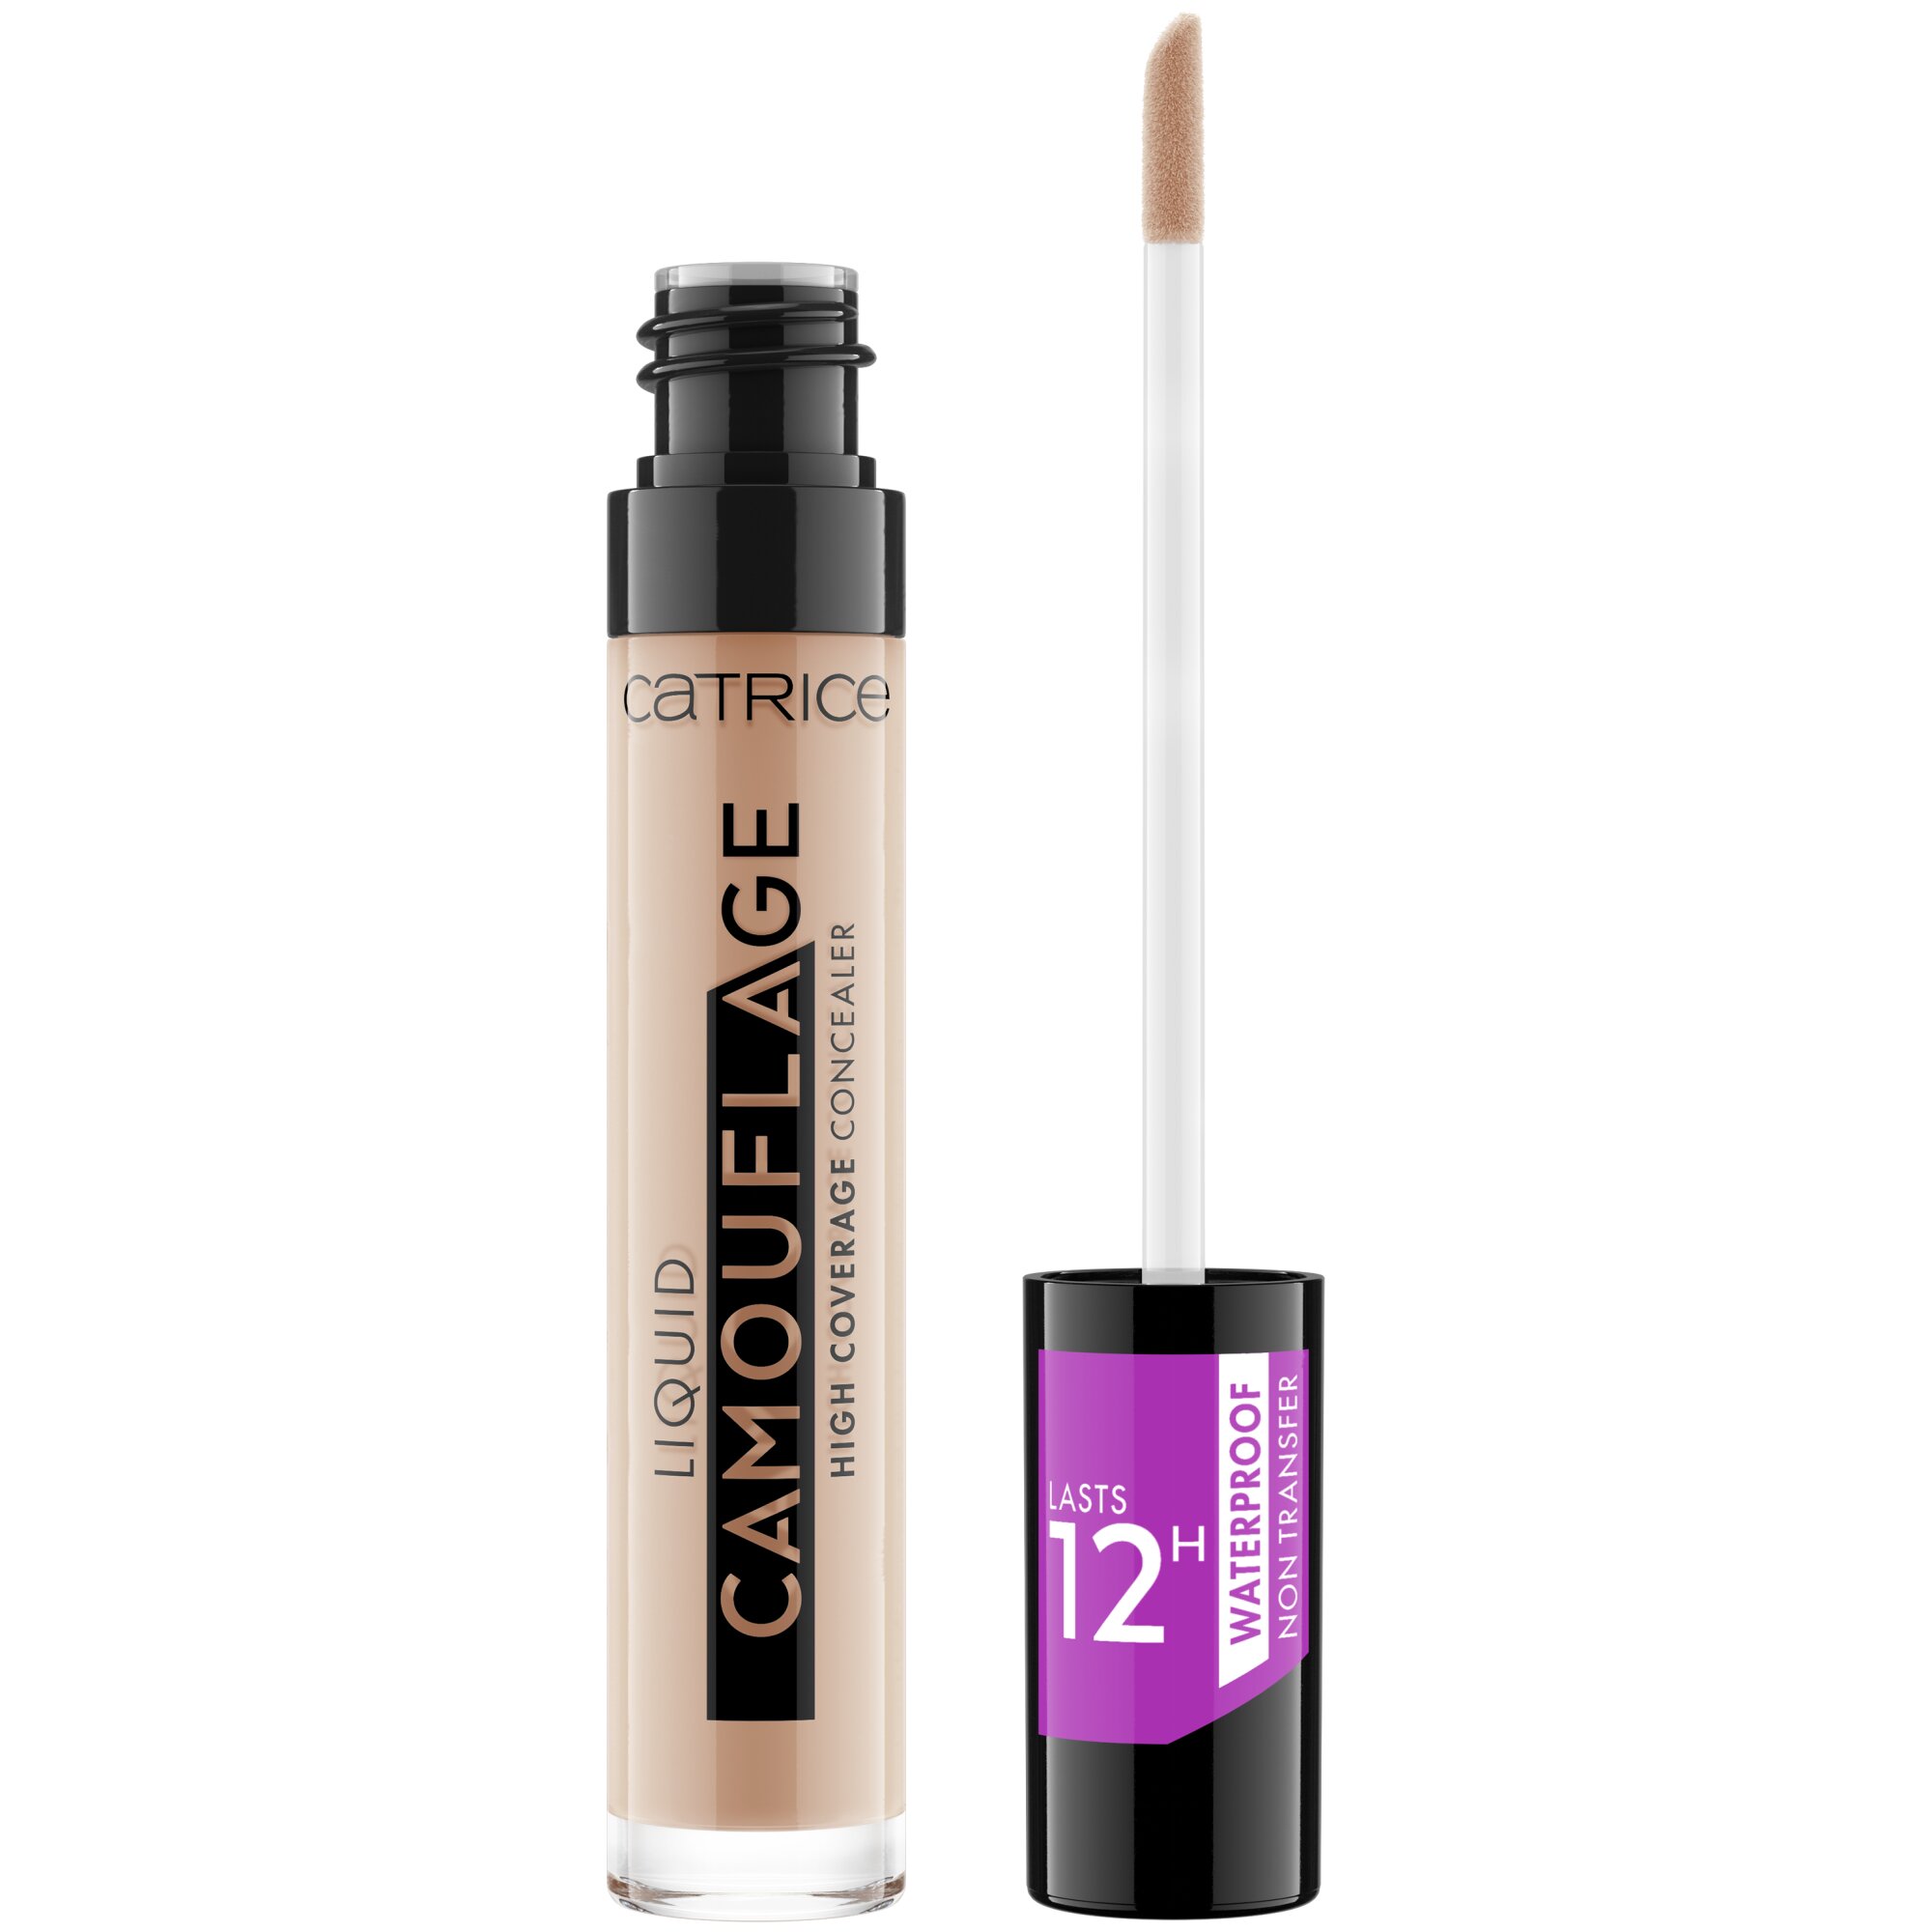 Corector lichid Camouflage High Coverage, 010 - Porcellain, 5 ml, Catrice